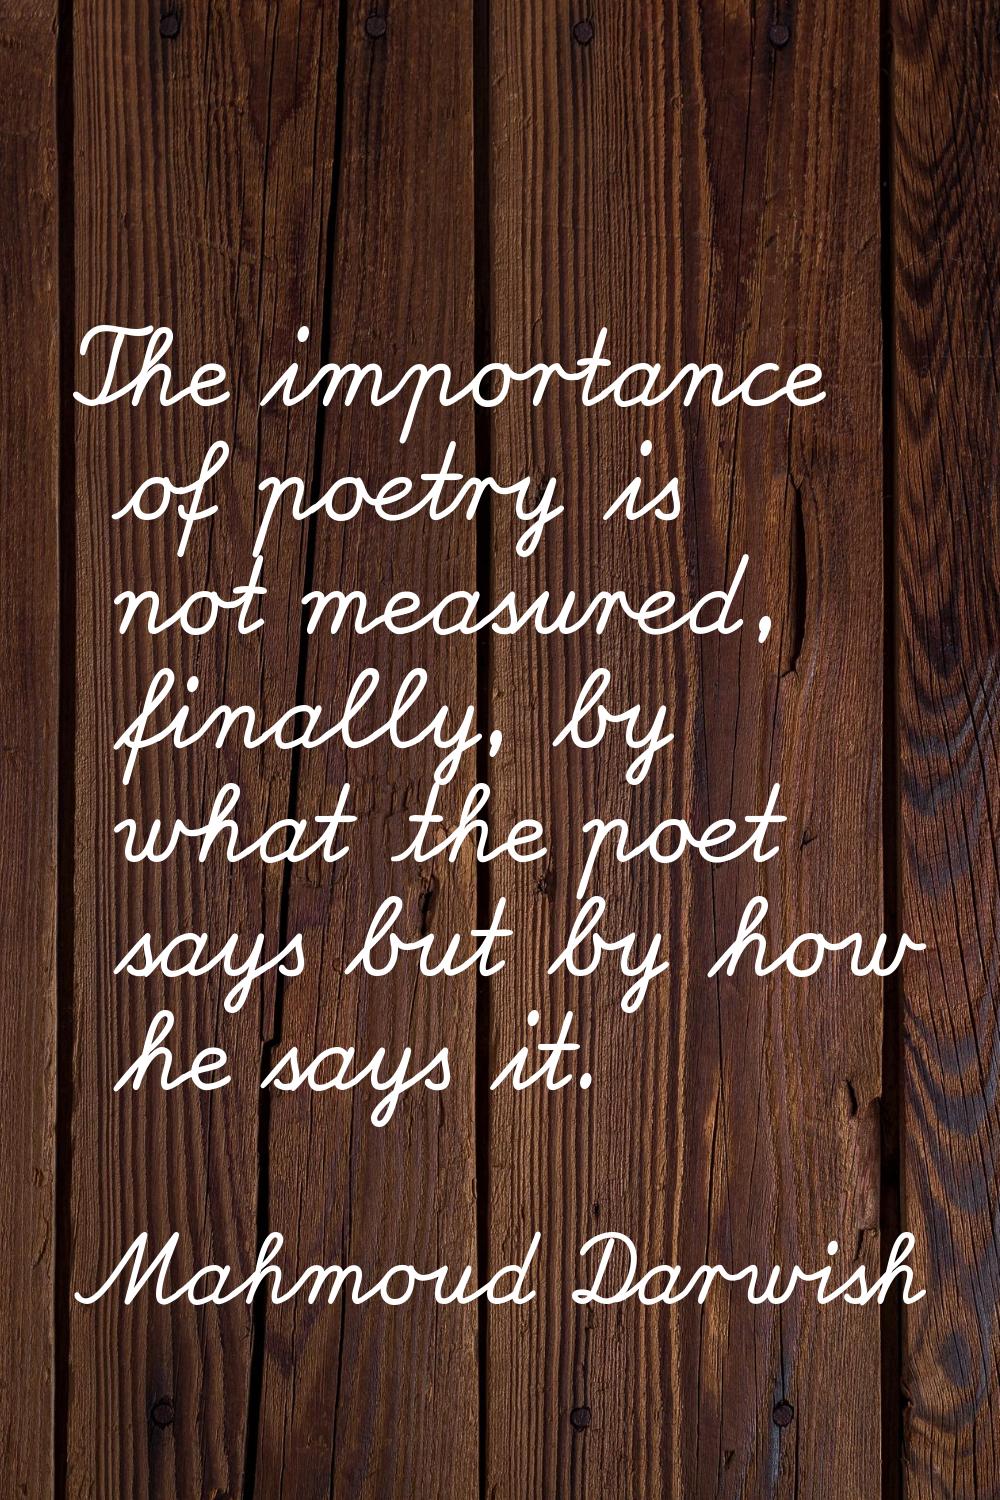 The importance of poetry is not measured, finally, by what the poet says but by how he says it.